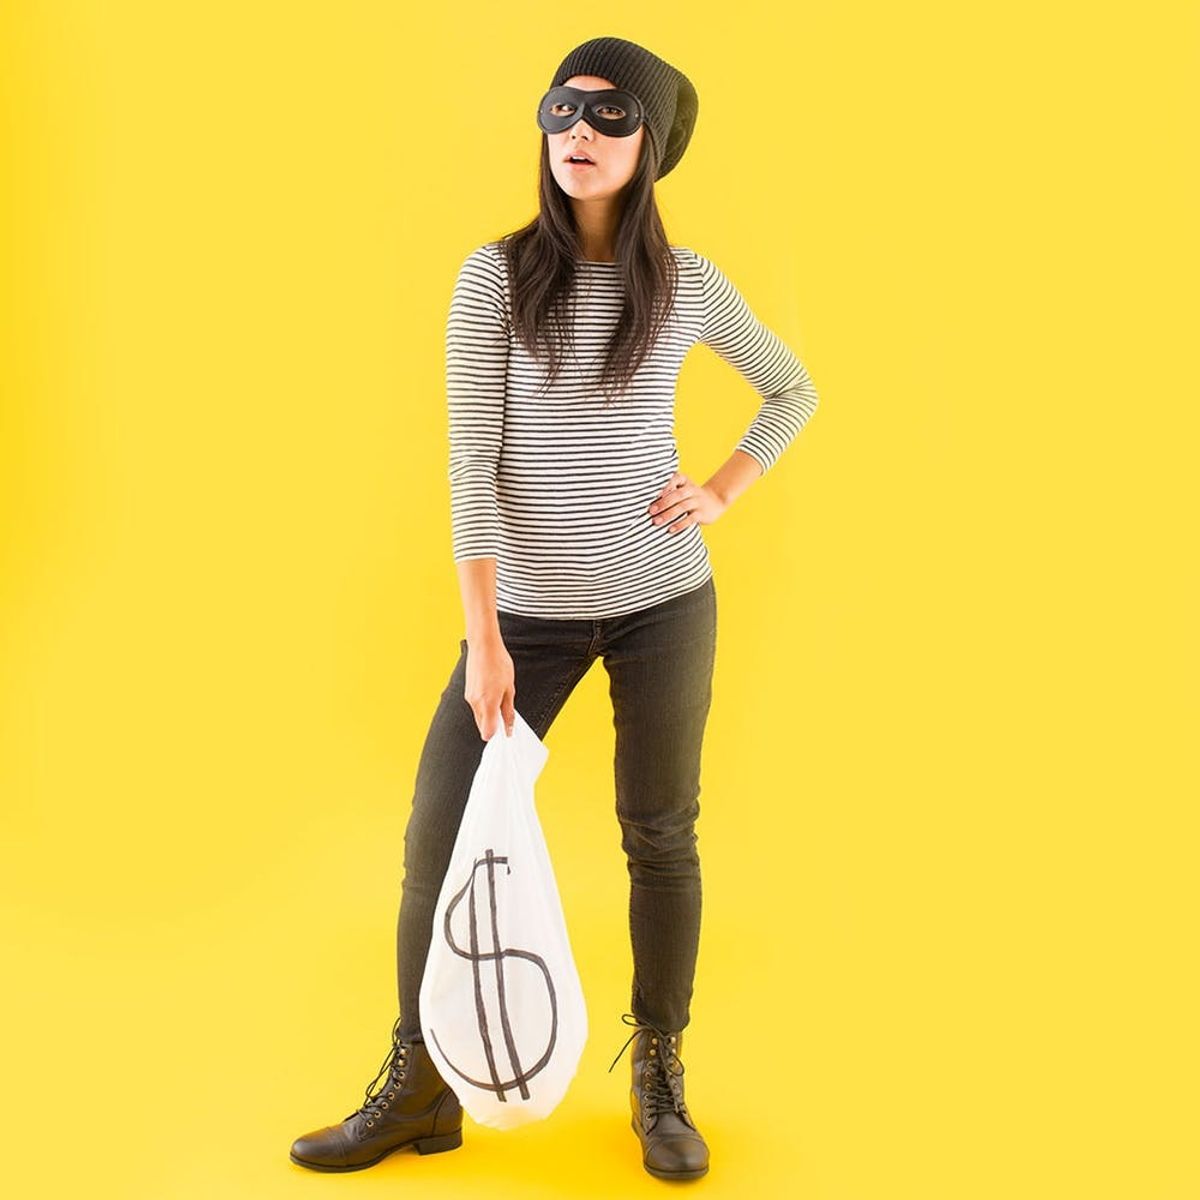 This Easy Bank Robber Halloween Costume Is Already in Your Closet